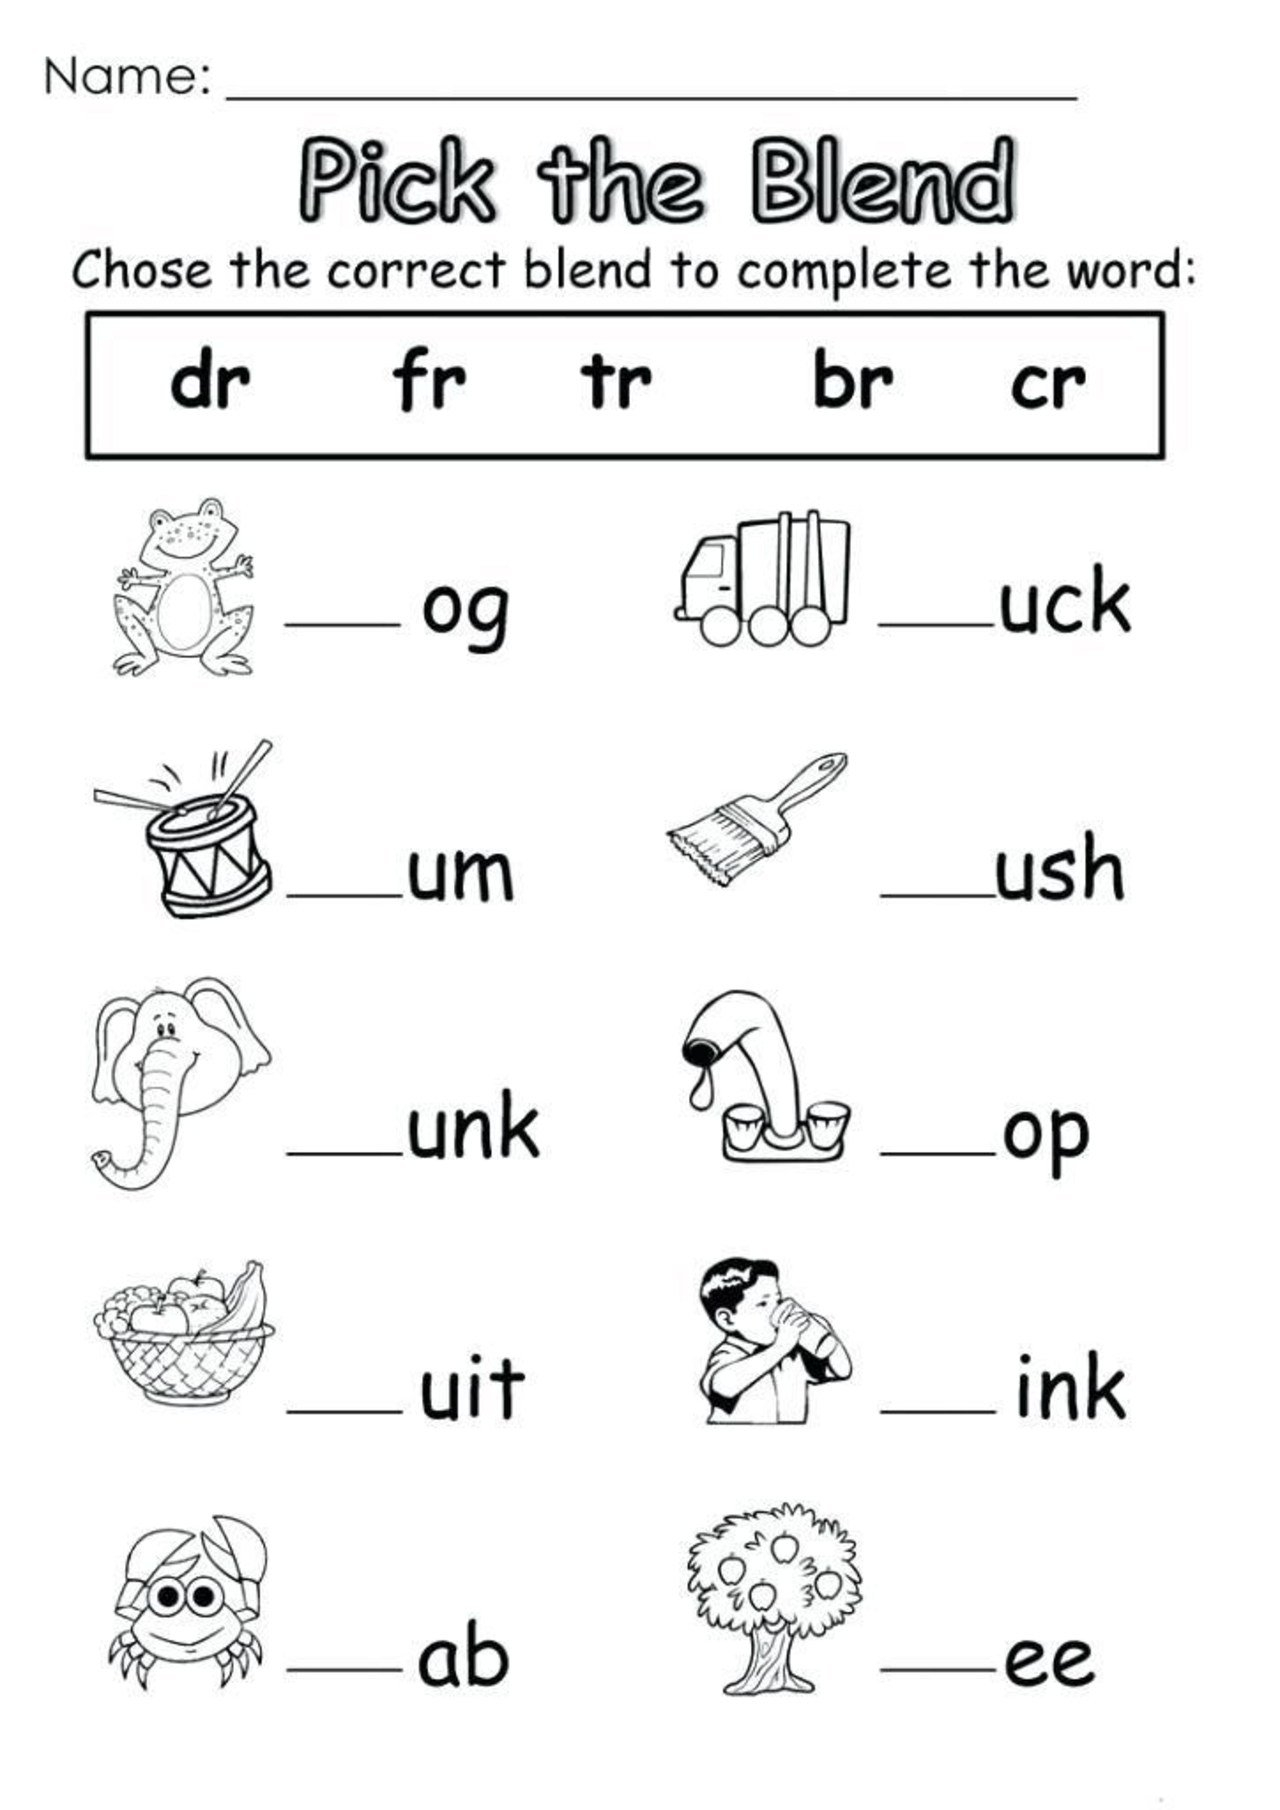 Top 25 Blends Worksheets Hd Wallpapers With Regard To Blends And Digraphs Worksheets